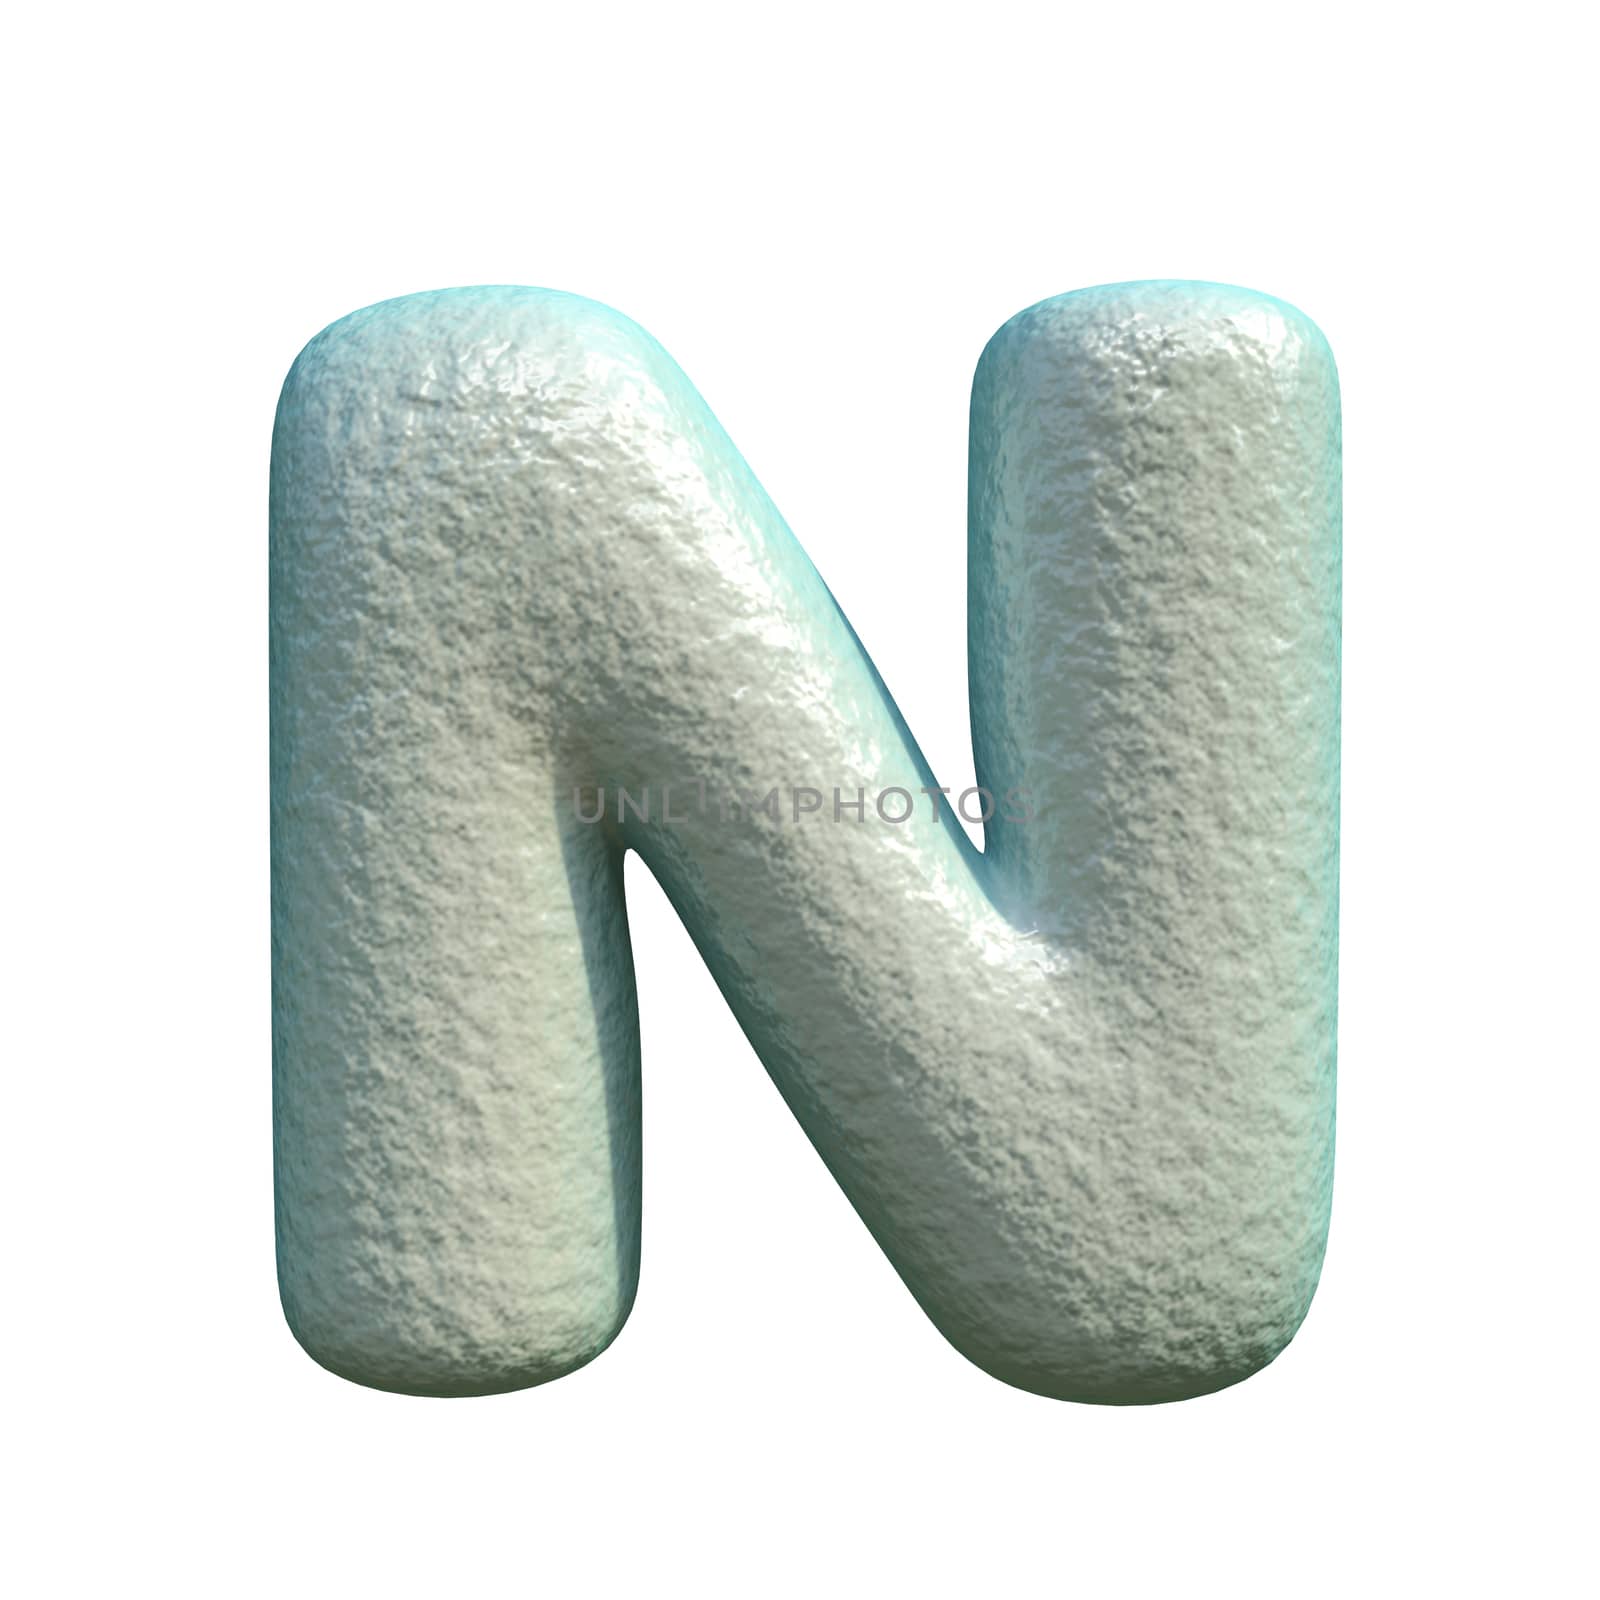 Grey blue clay font Letter N 3D rendering illustration isolated on white background